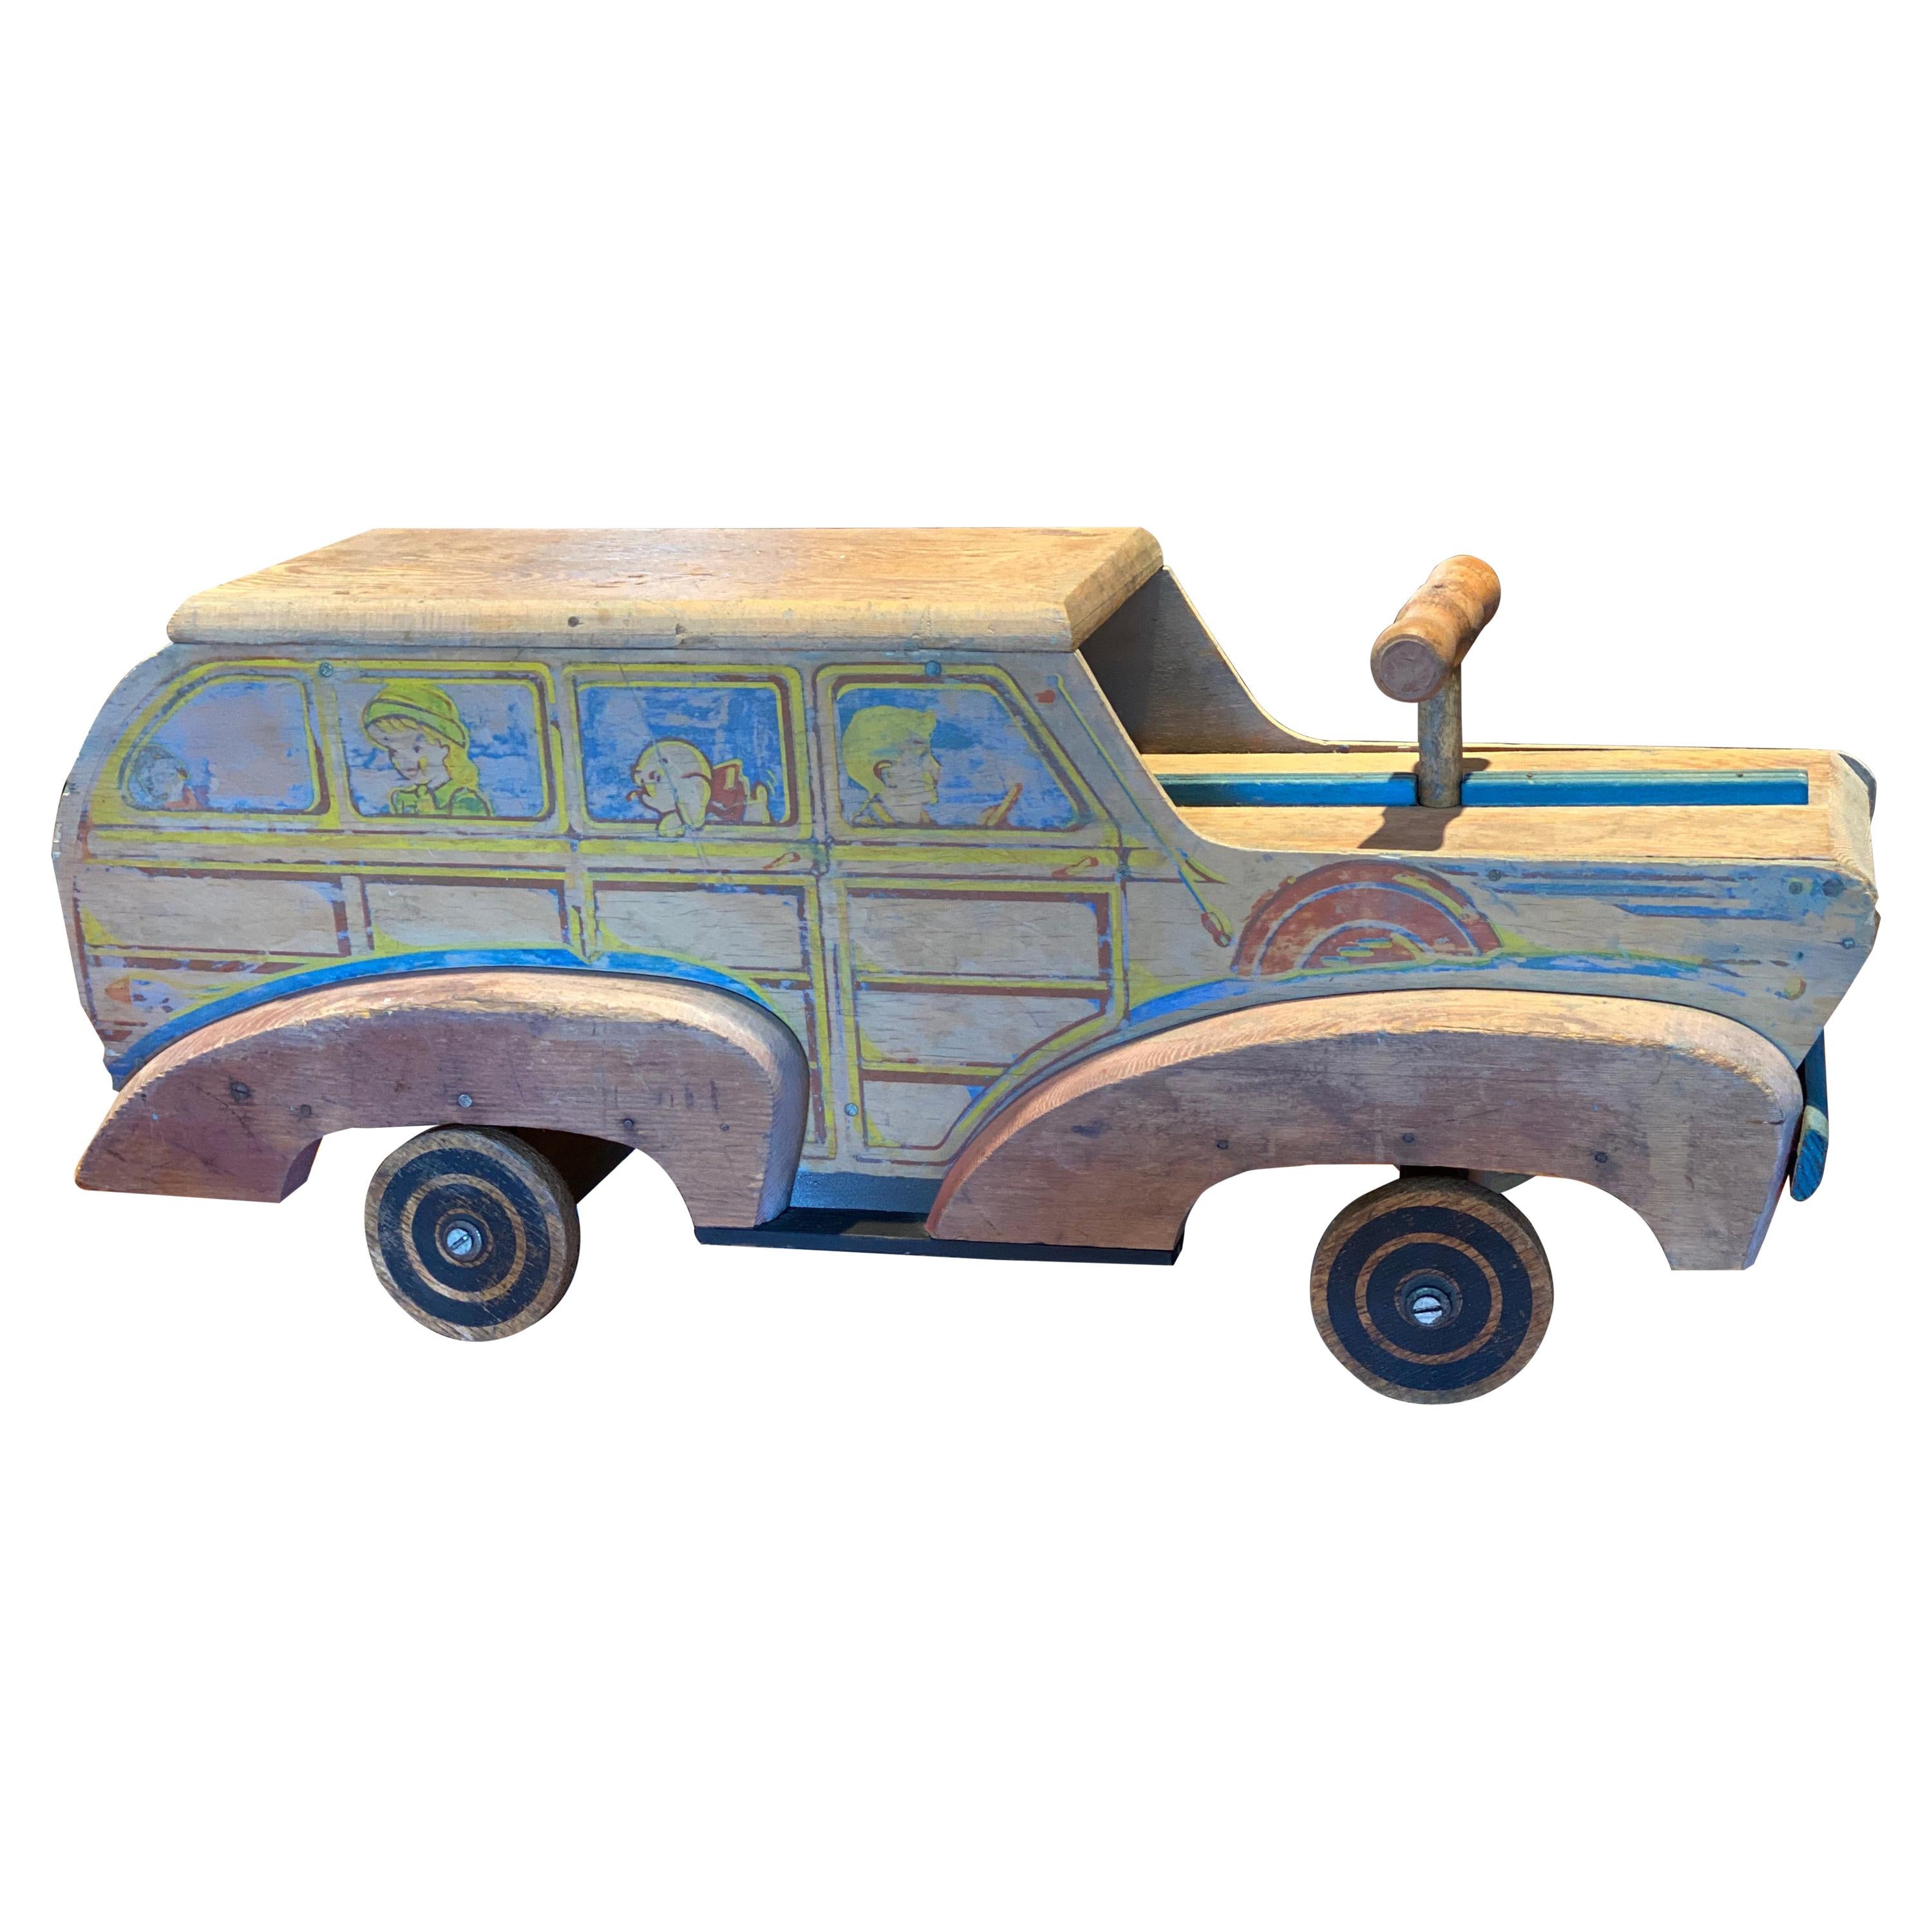 Painted and Carved Toy 'Woody' Car, circa 1930s-1940s